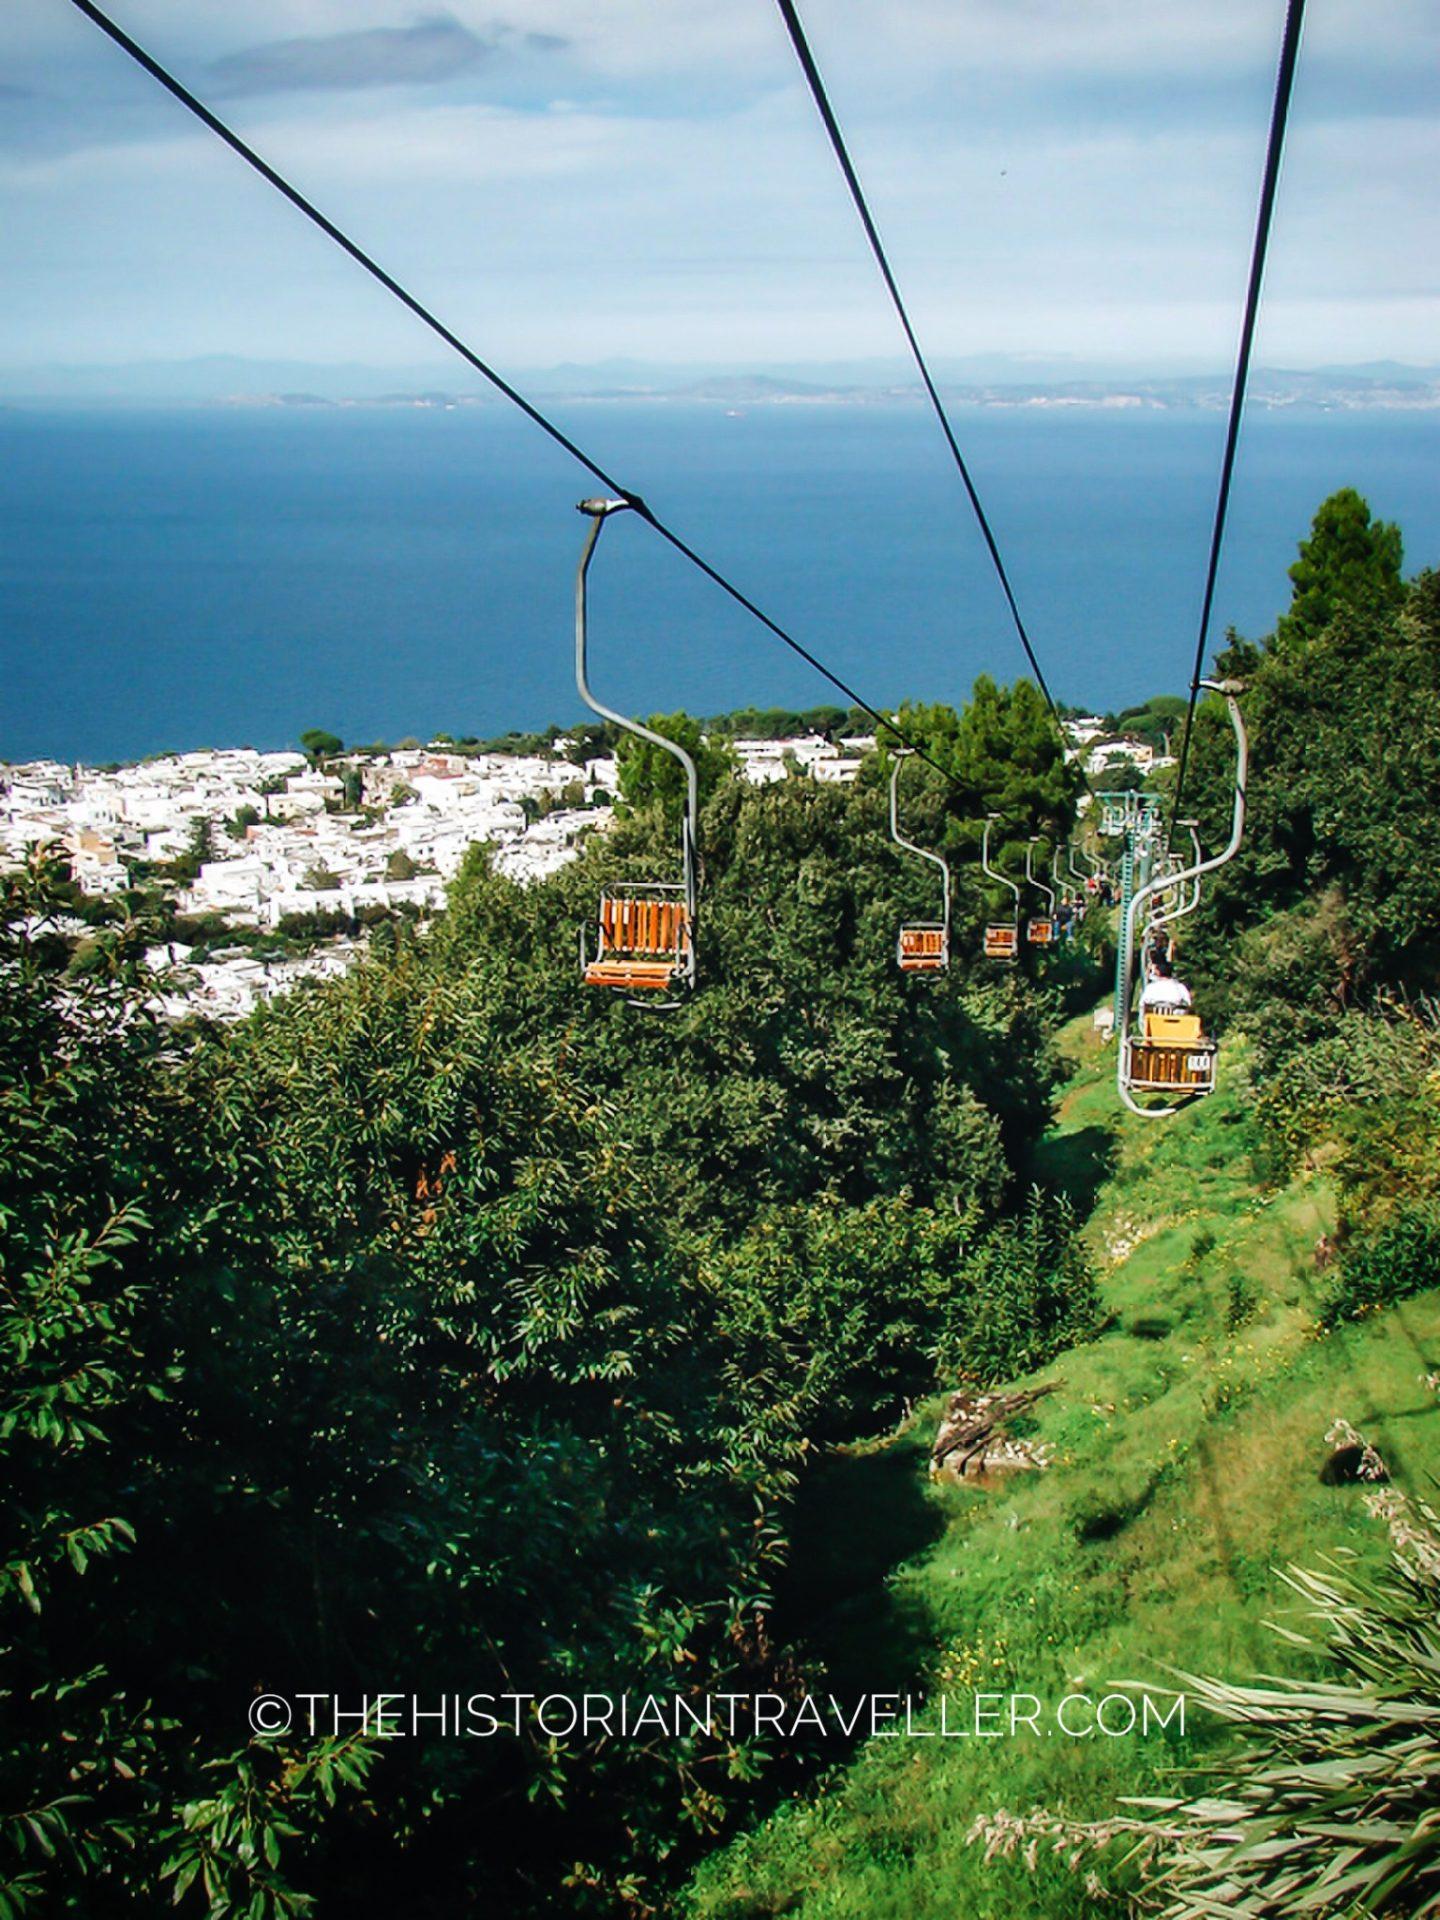 Capri scooter itinerary - Monte solaro chairlift view